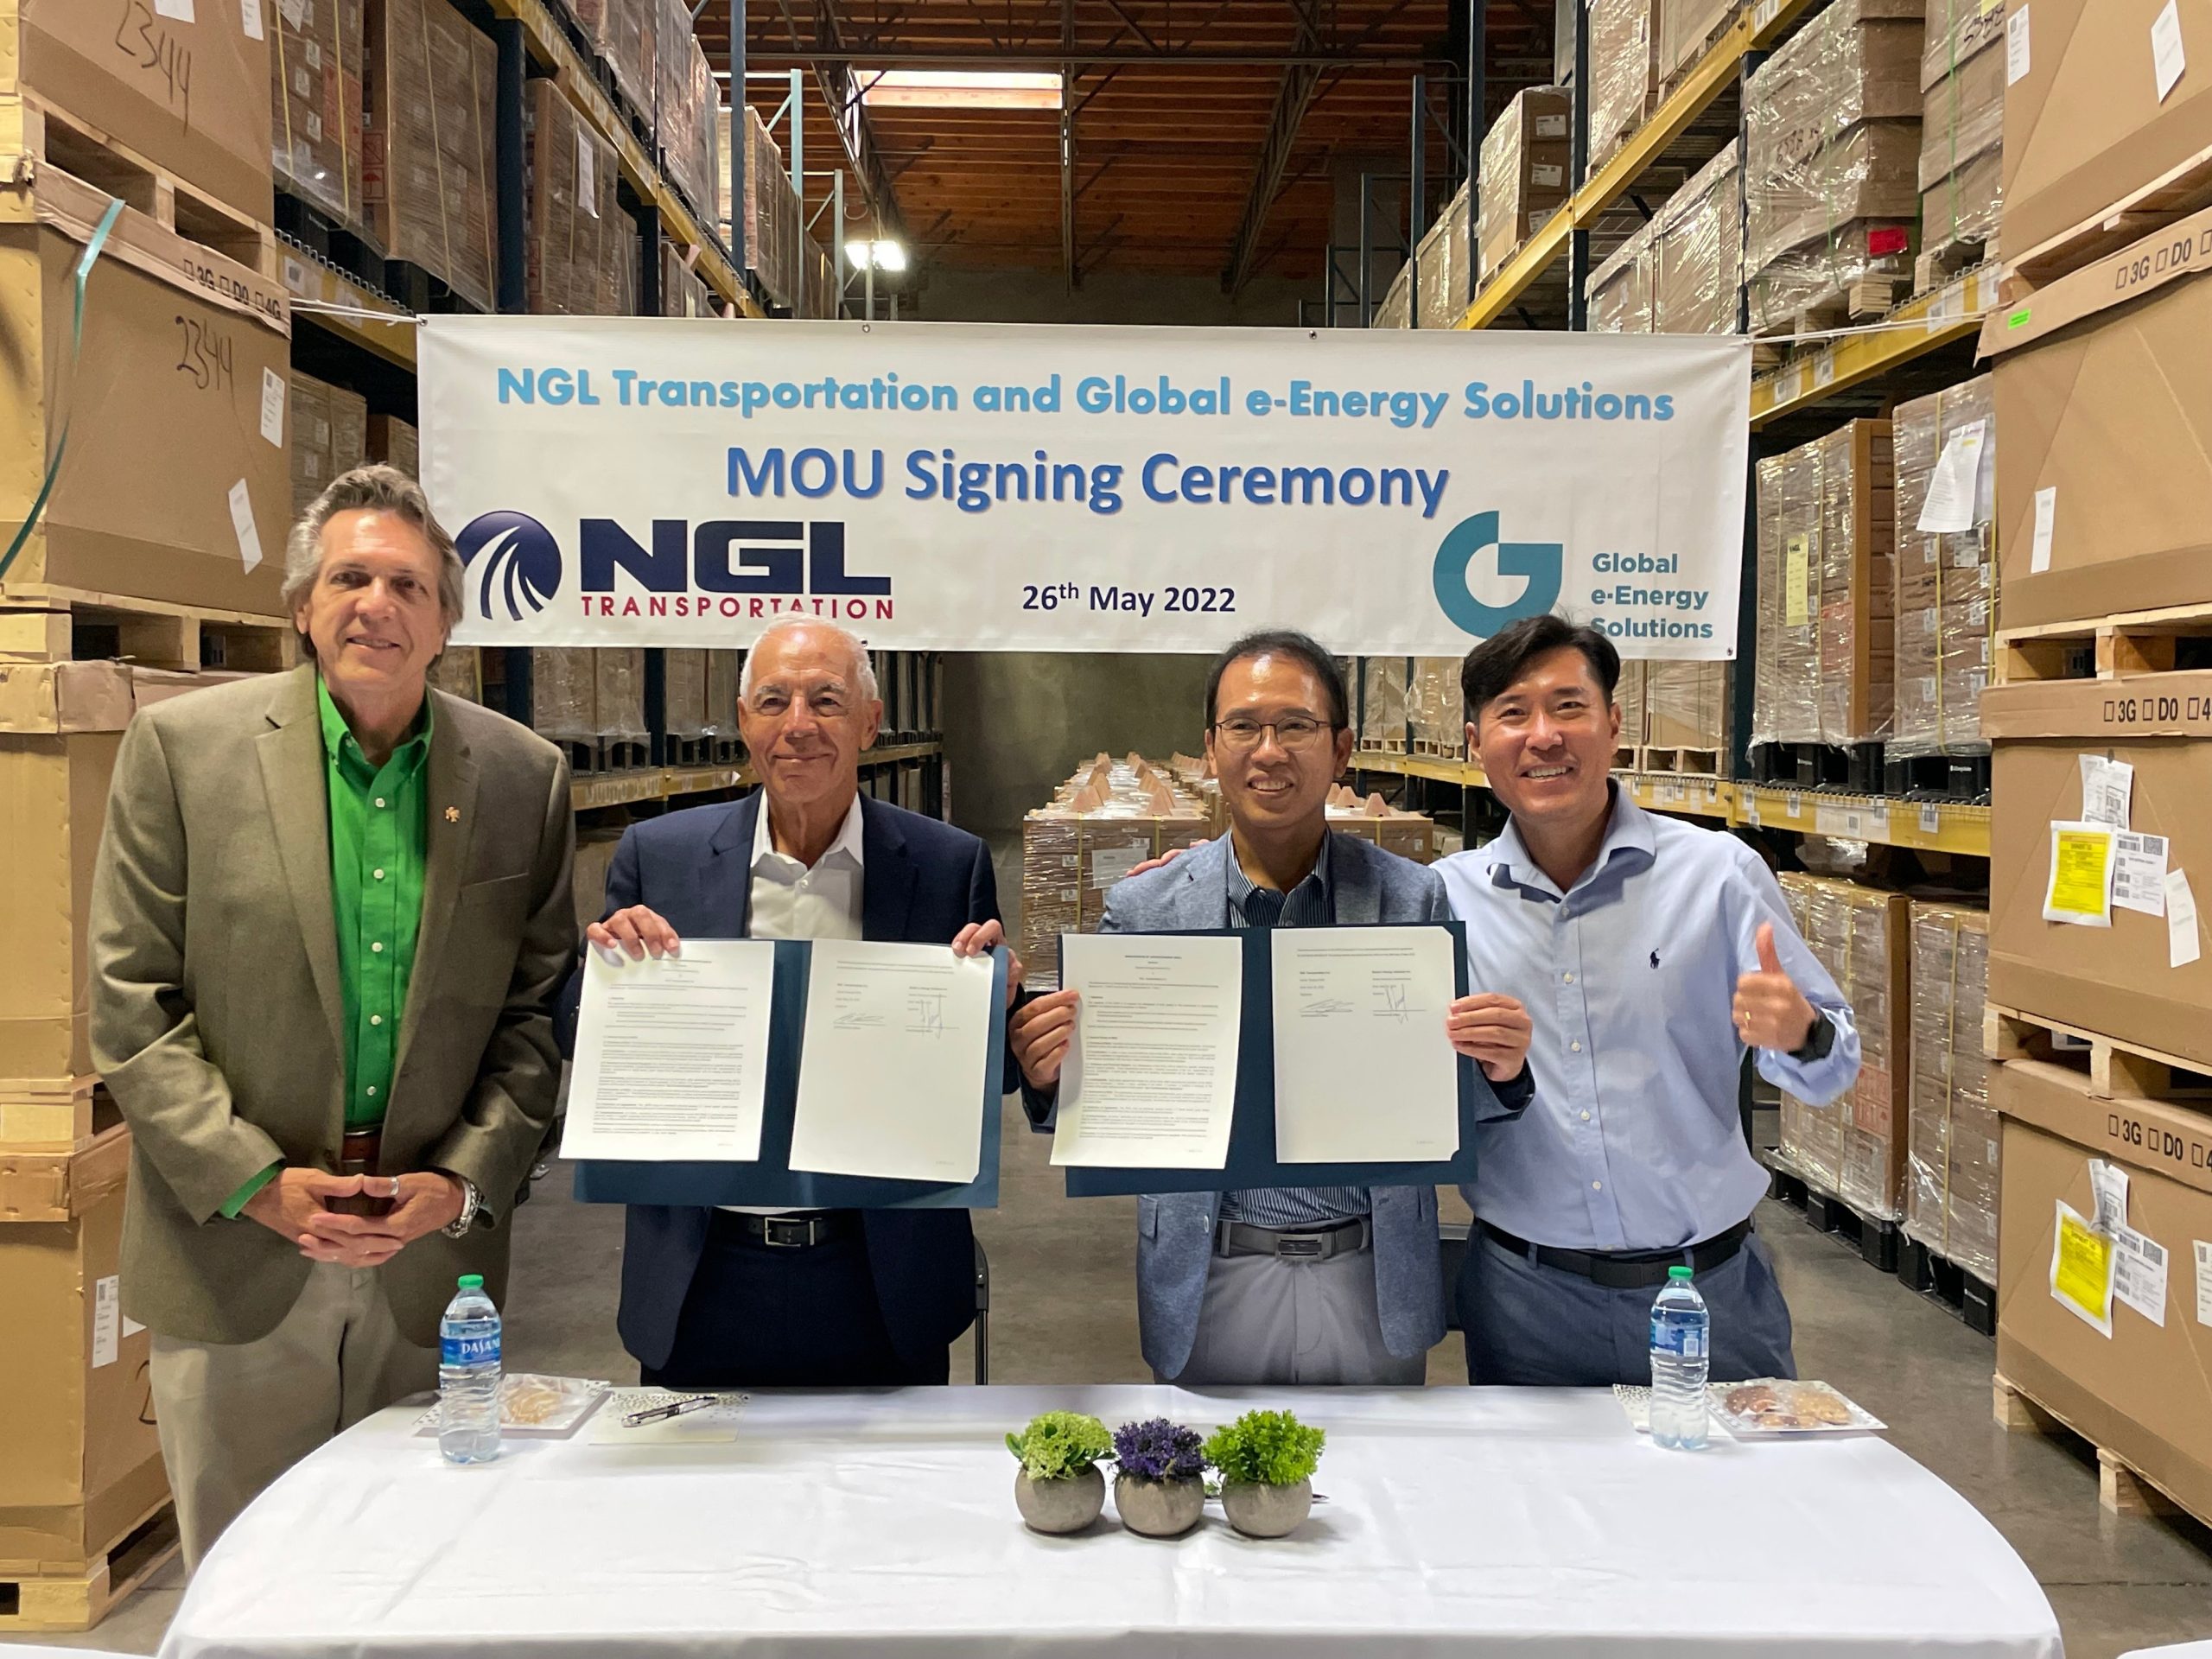 NGL signed MOU with Global e-Energy Solutions